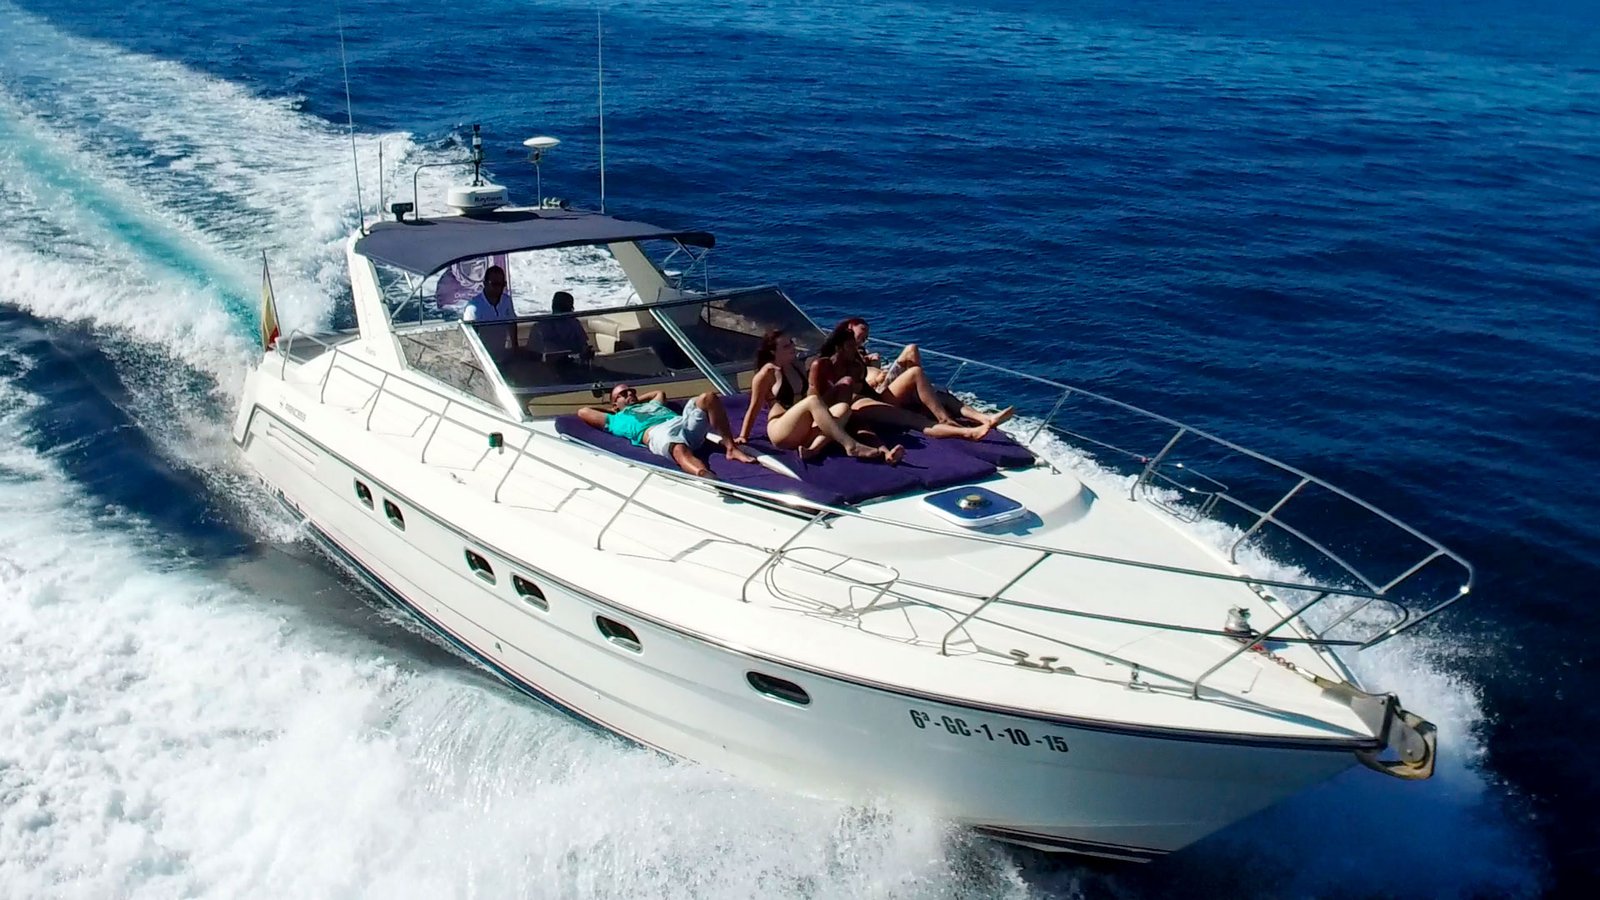 Gran Canaria Trip: Private Yacht only reduced groups